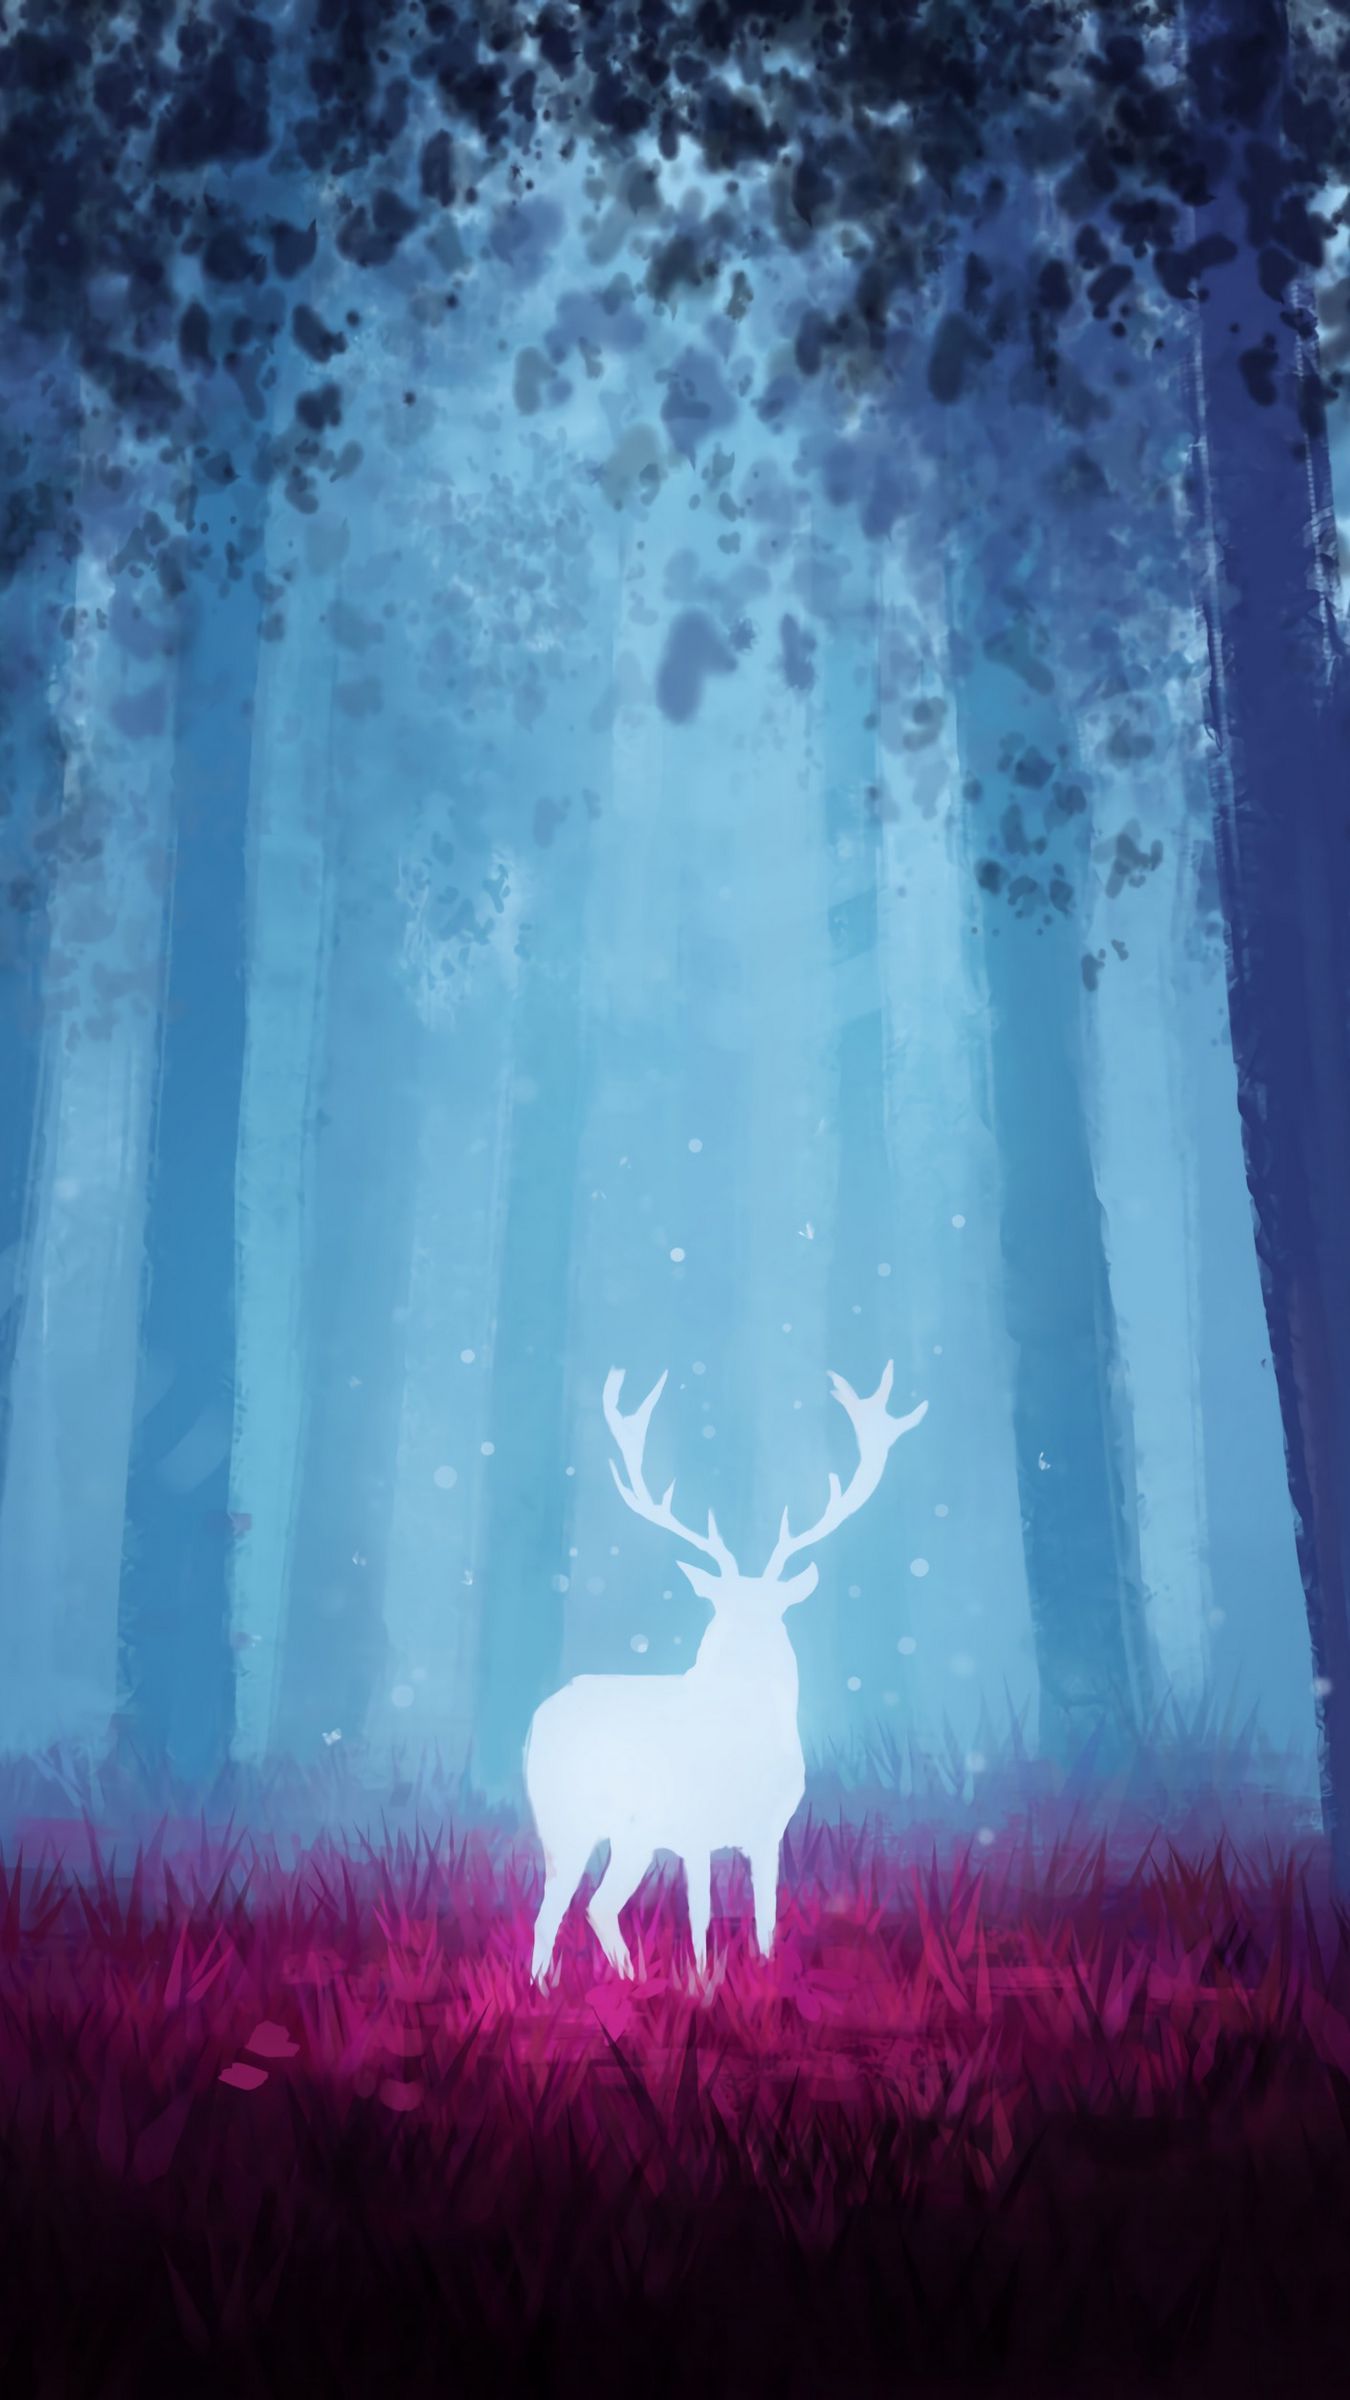 IPhone wallpaper of a deer in a forest with blue and pink colors. - Deer